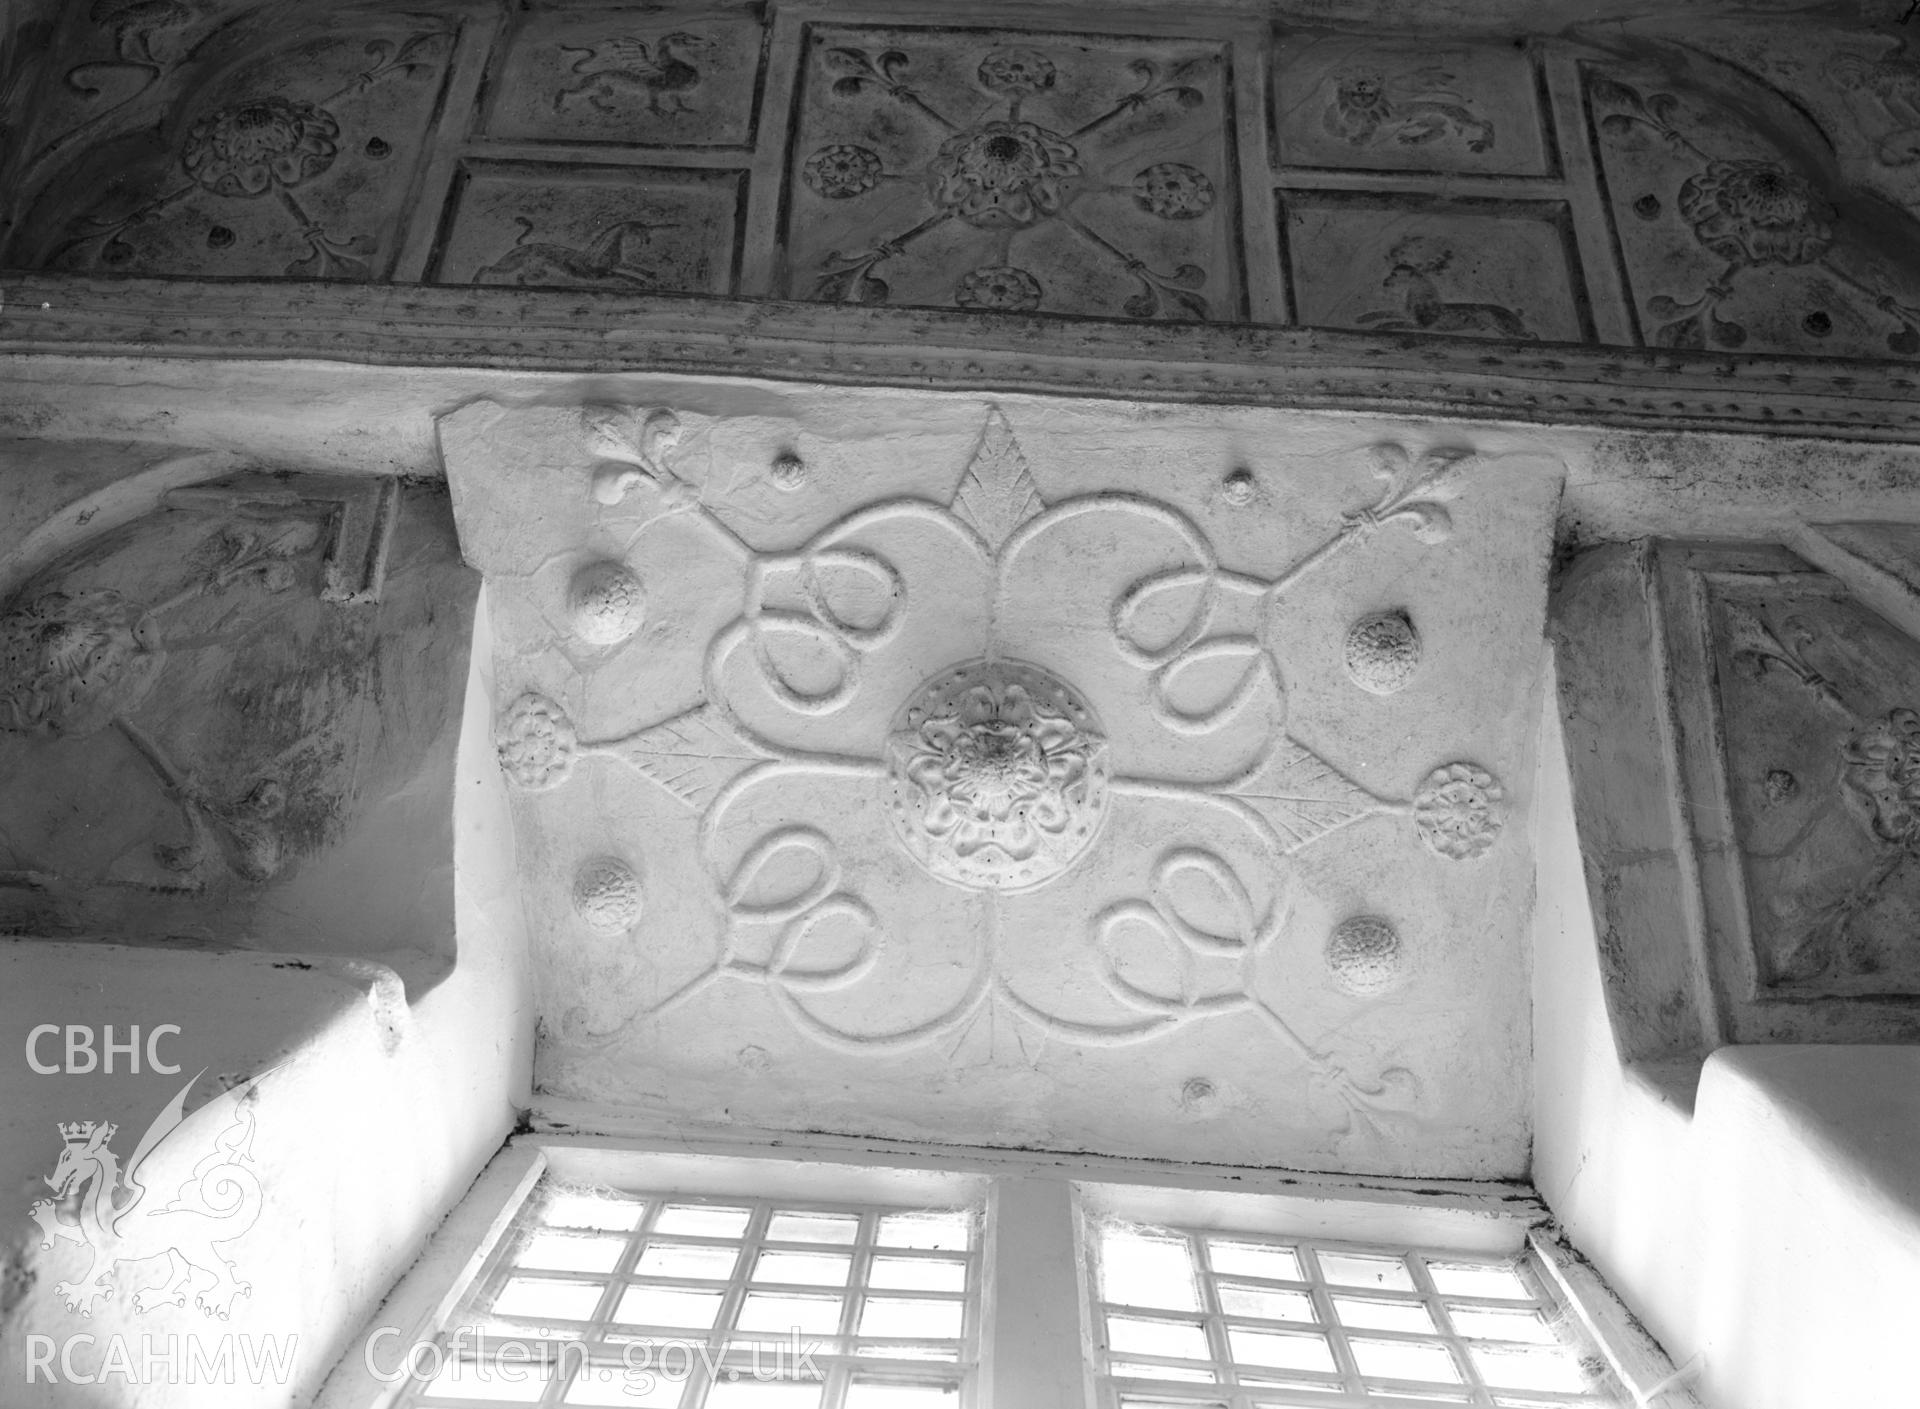 Interior view showing detail of the ceiling in the Great Hall.